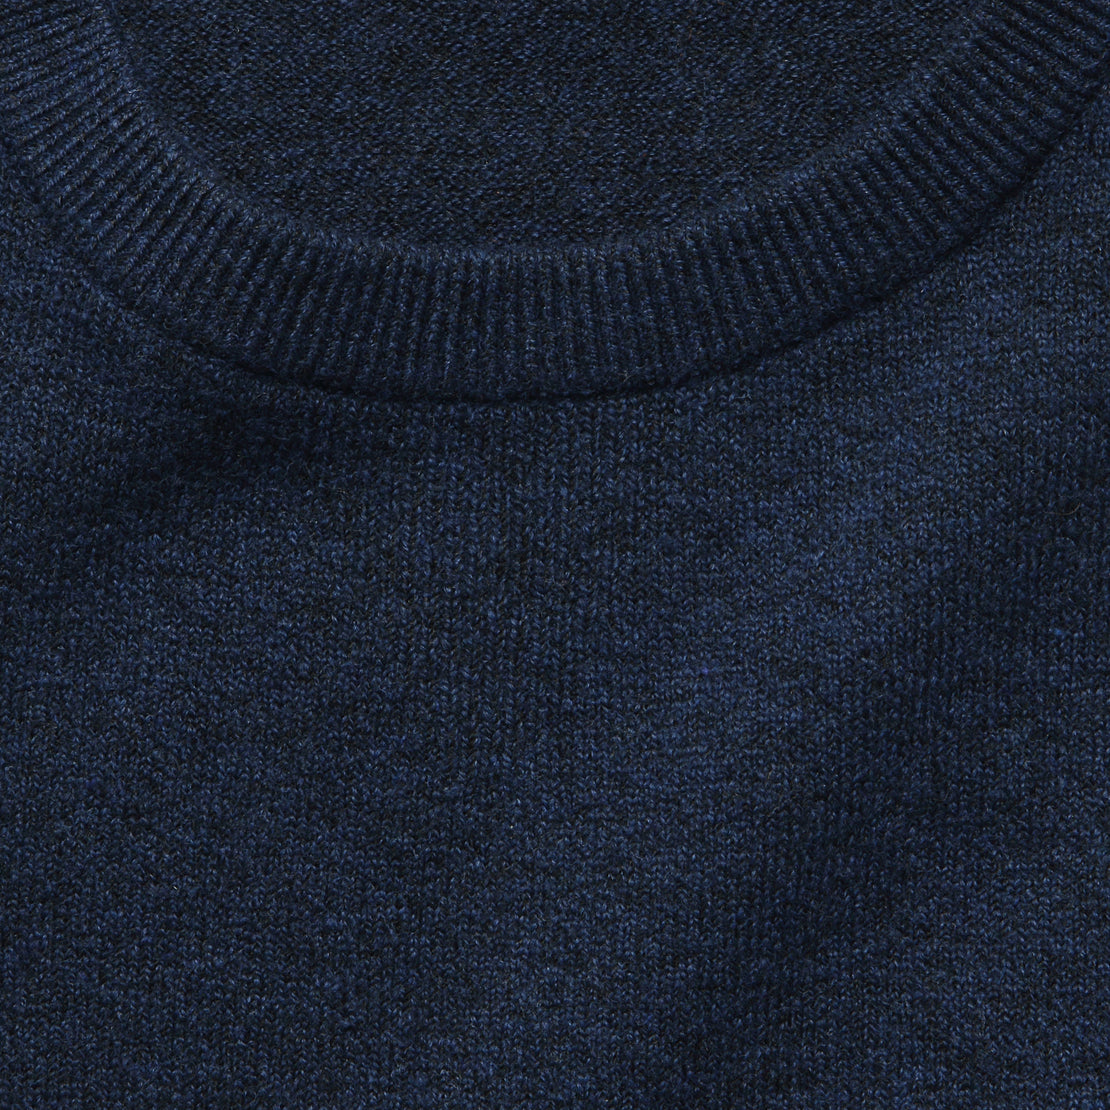 Jackson Crew Sweater - Navy Heather - Faherty - STAG Provisions - Tops - Sweater